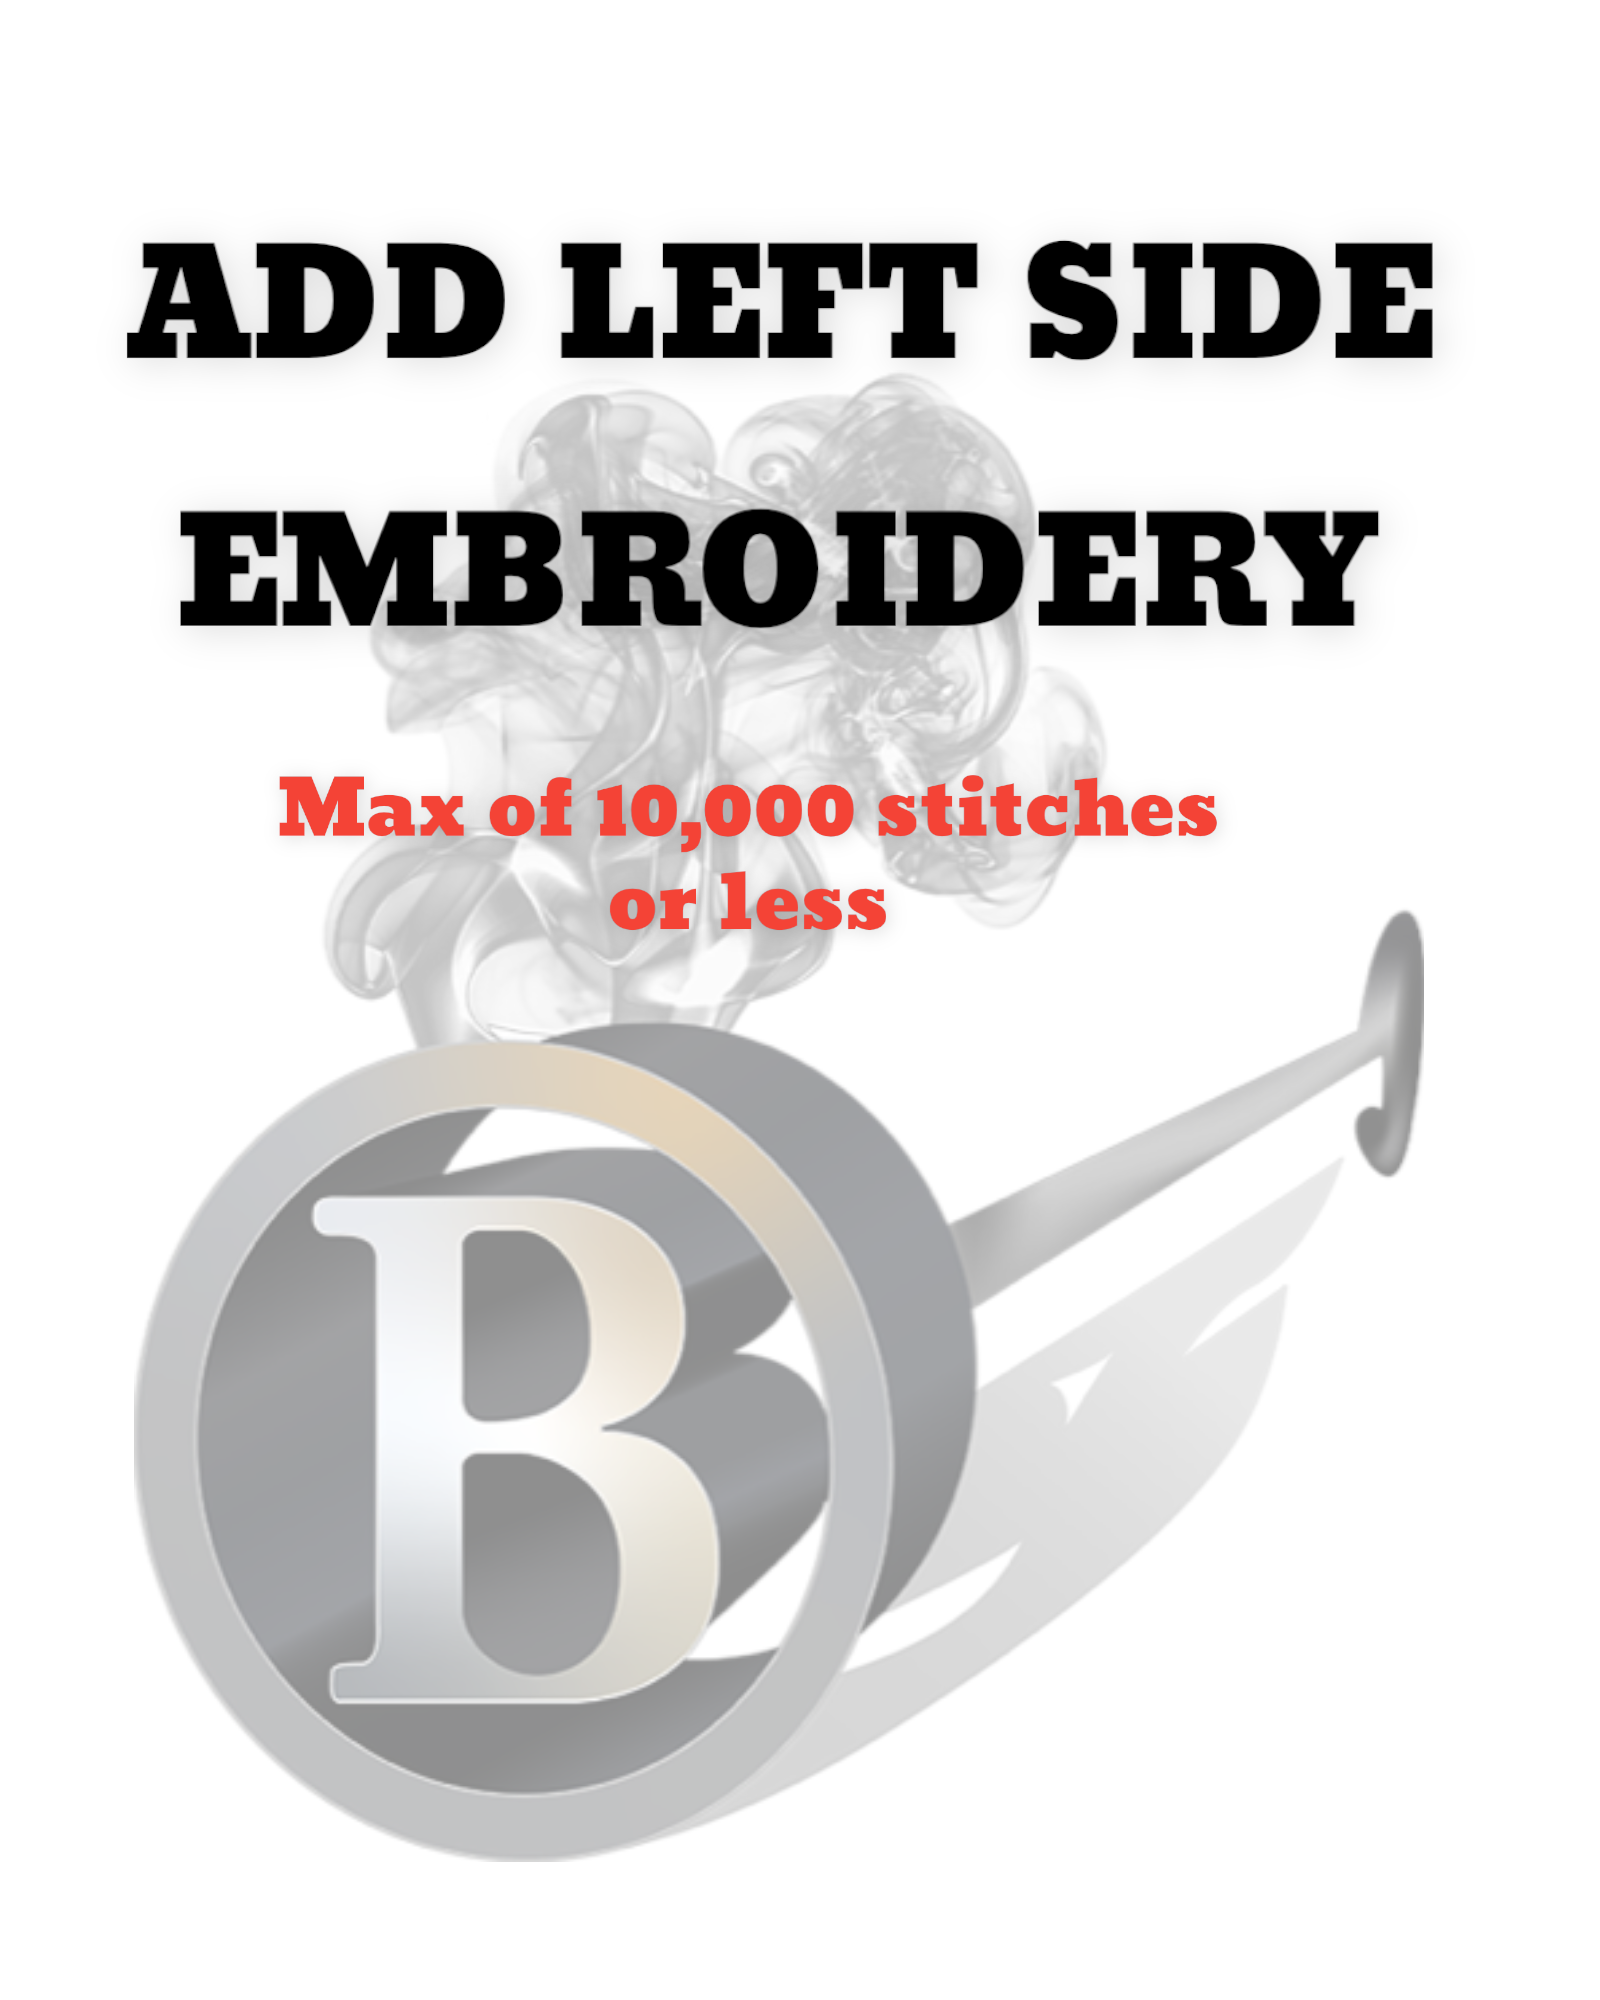 Add left side Embroidery (Review offer details prior to purchase) - BRNDURNAME